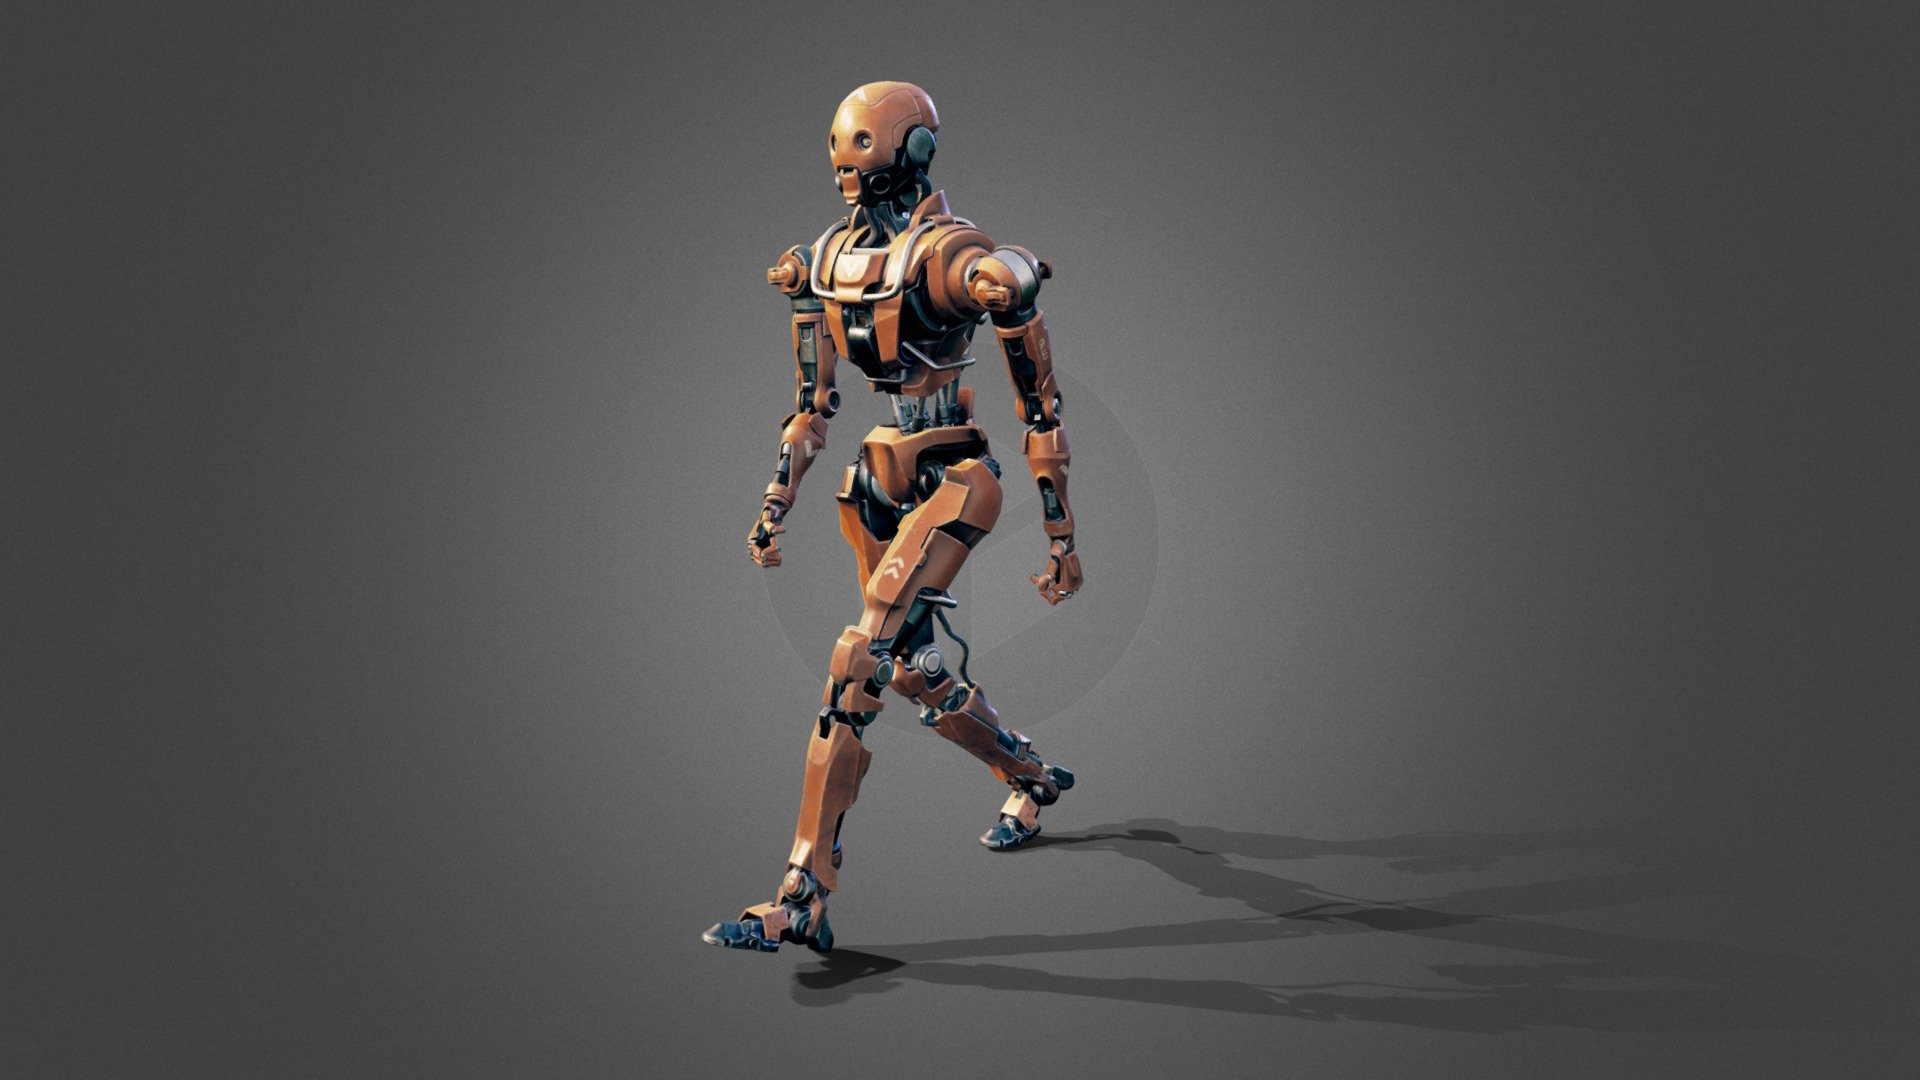 Made this robot specifically for this competition. I tried to think over and work out all the node and joints 3d model